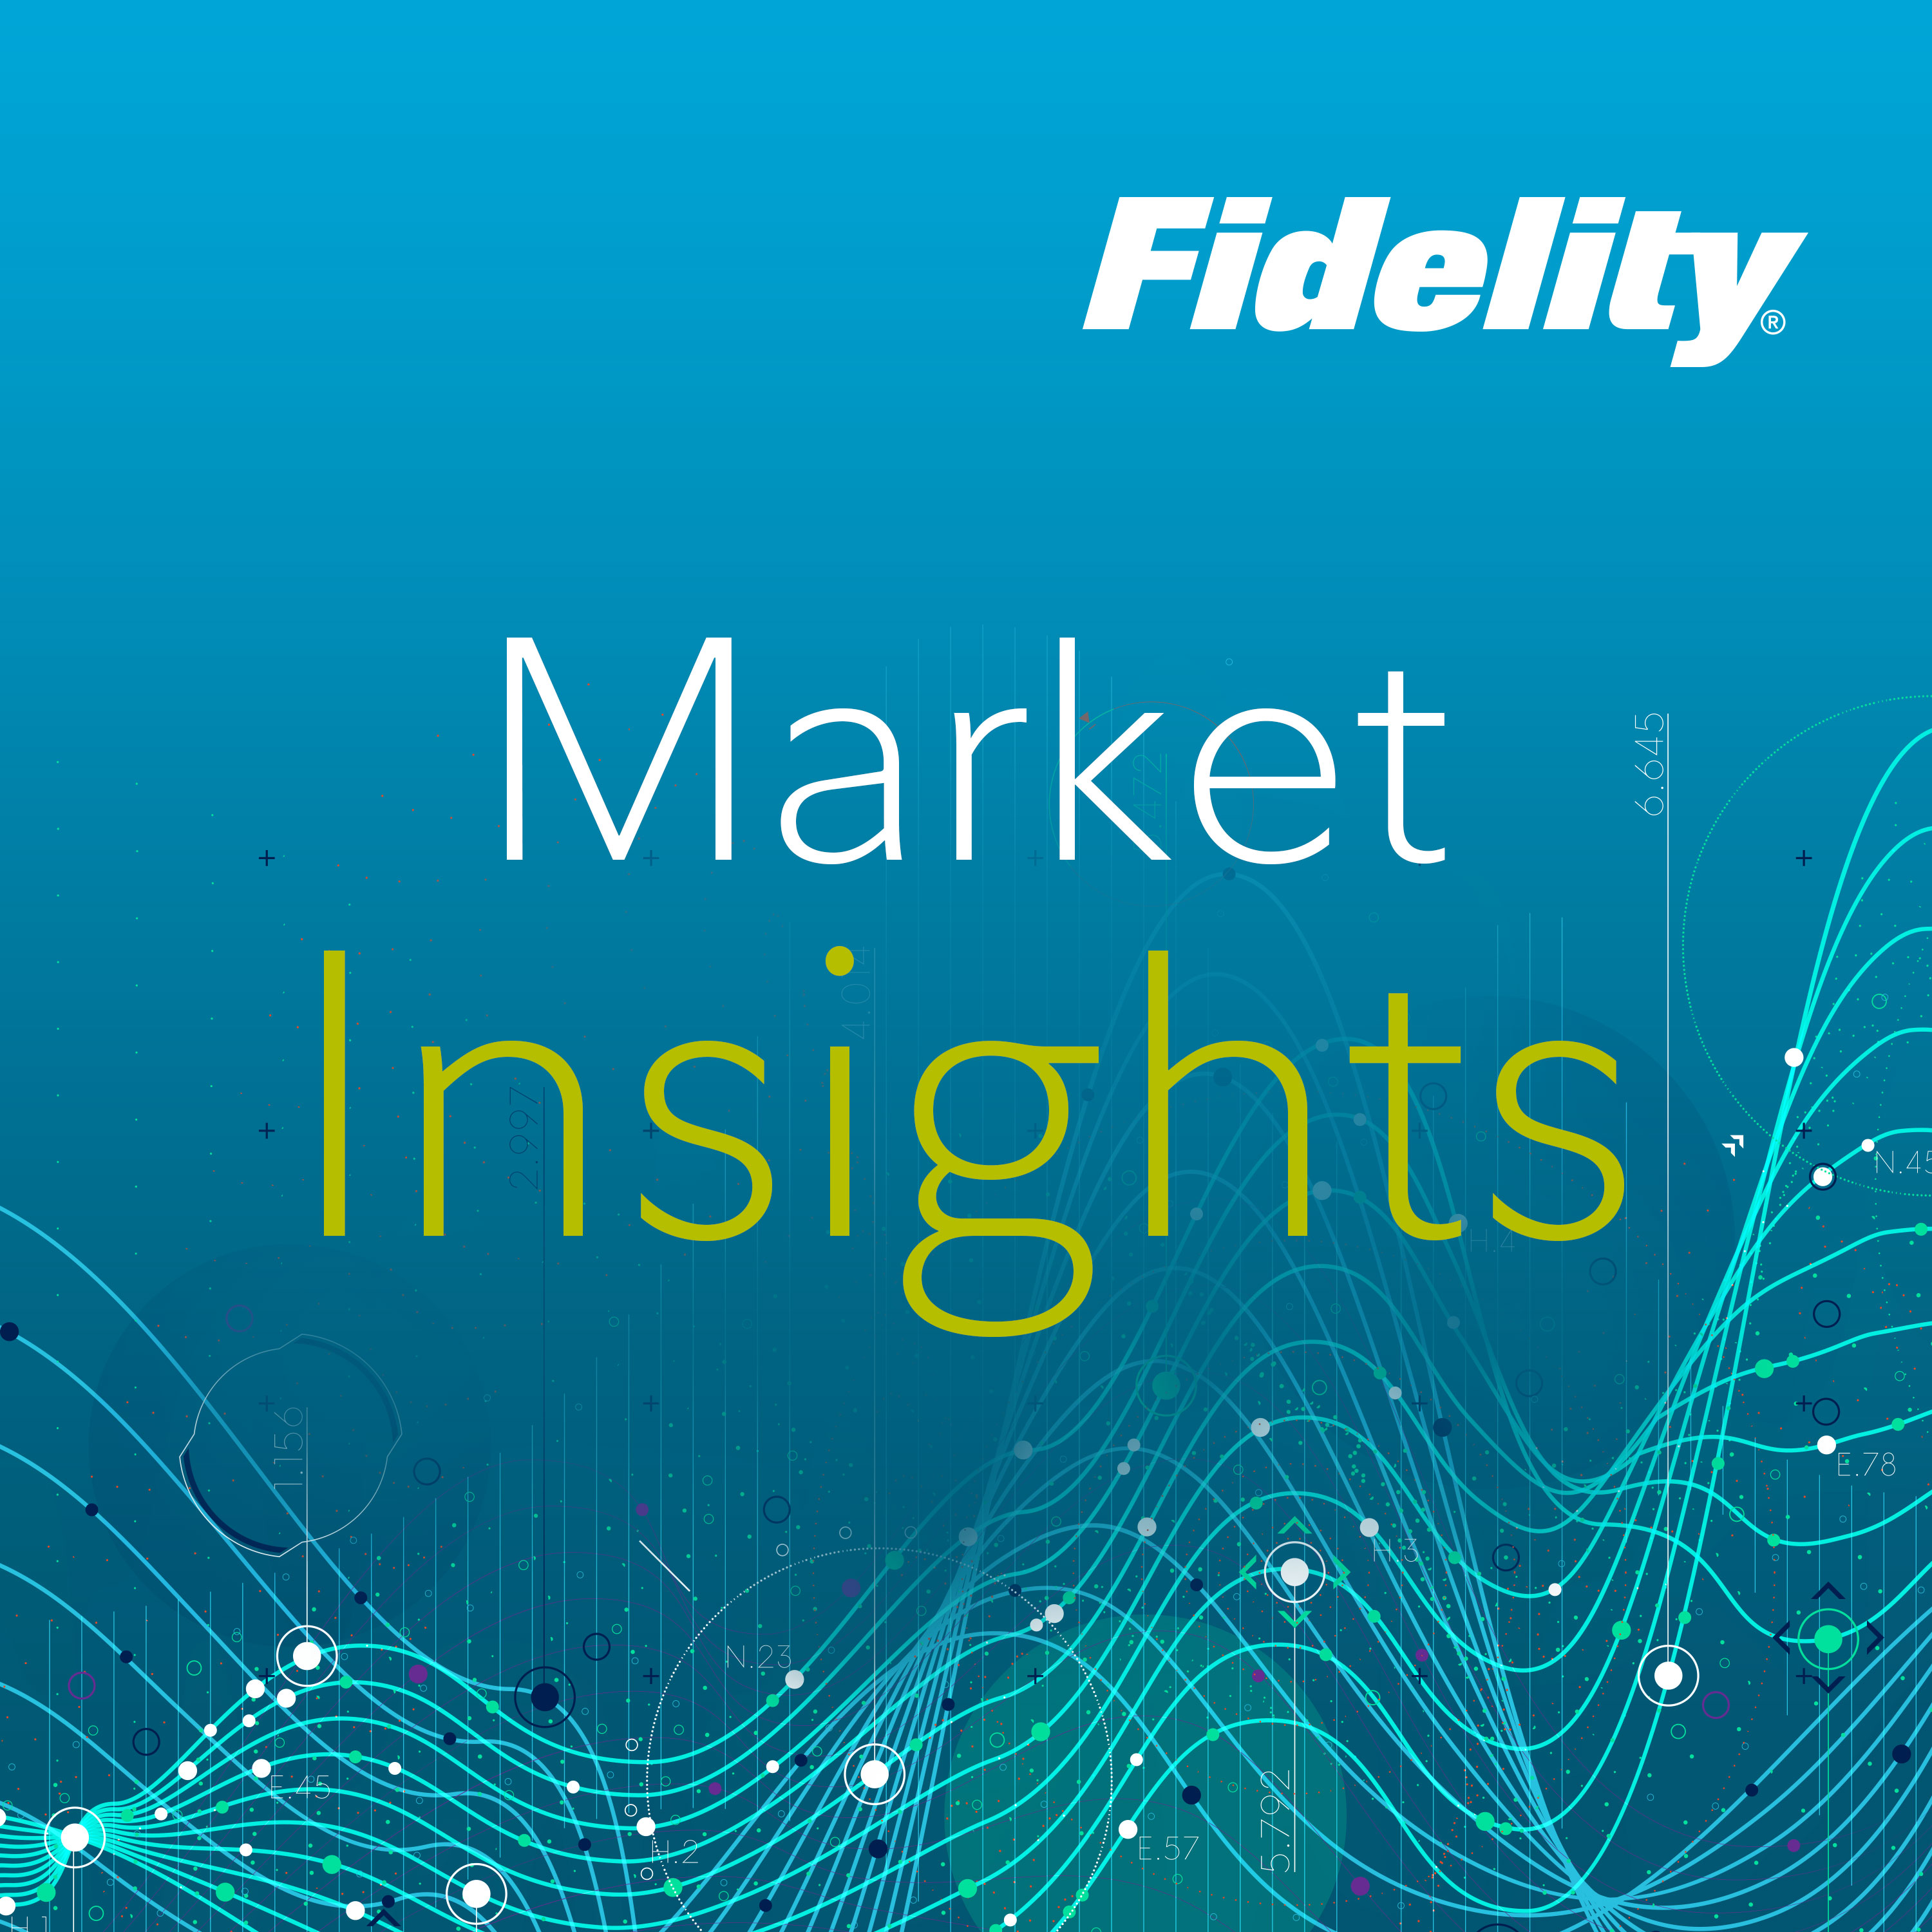 Market Insights: A look into the durability of the equity market recovery and a dive into a new suite of fundamental active ETFs